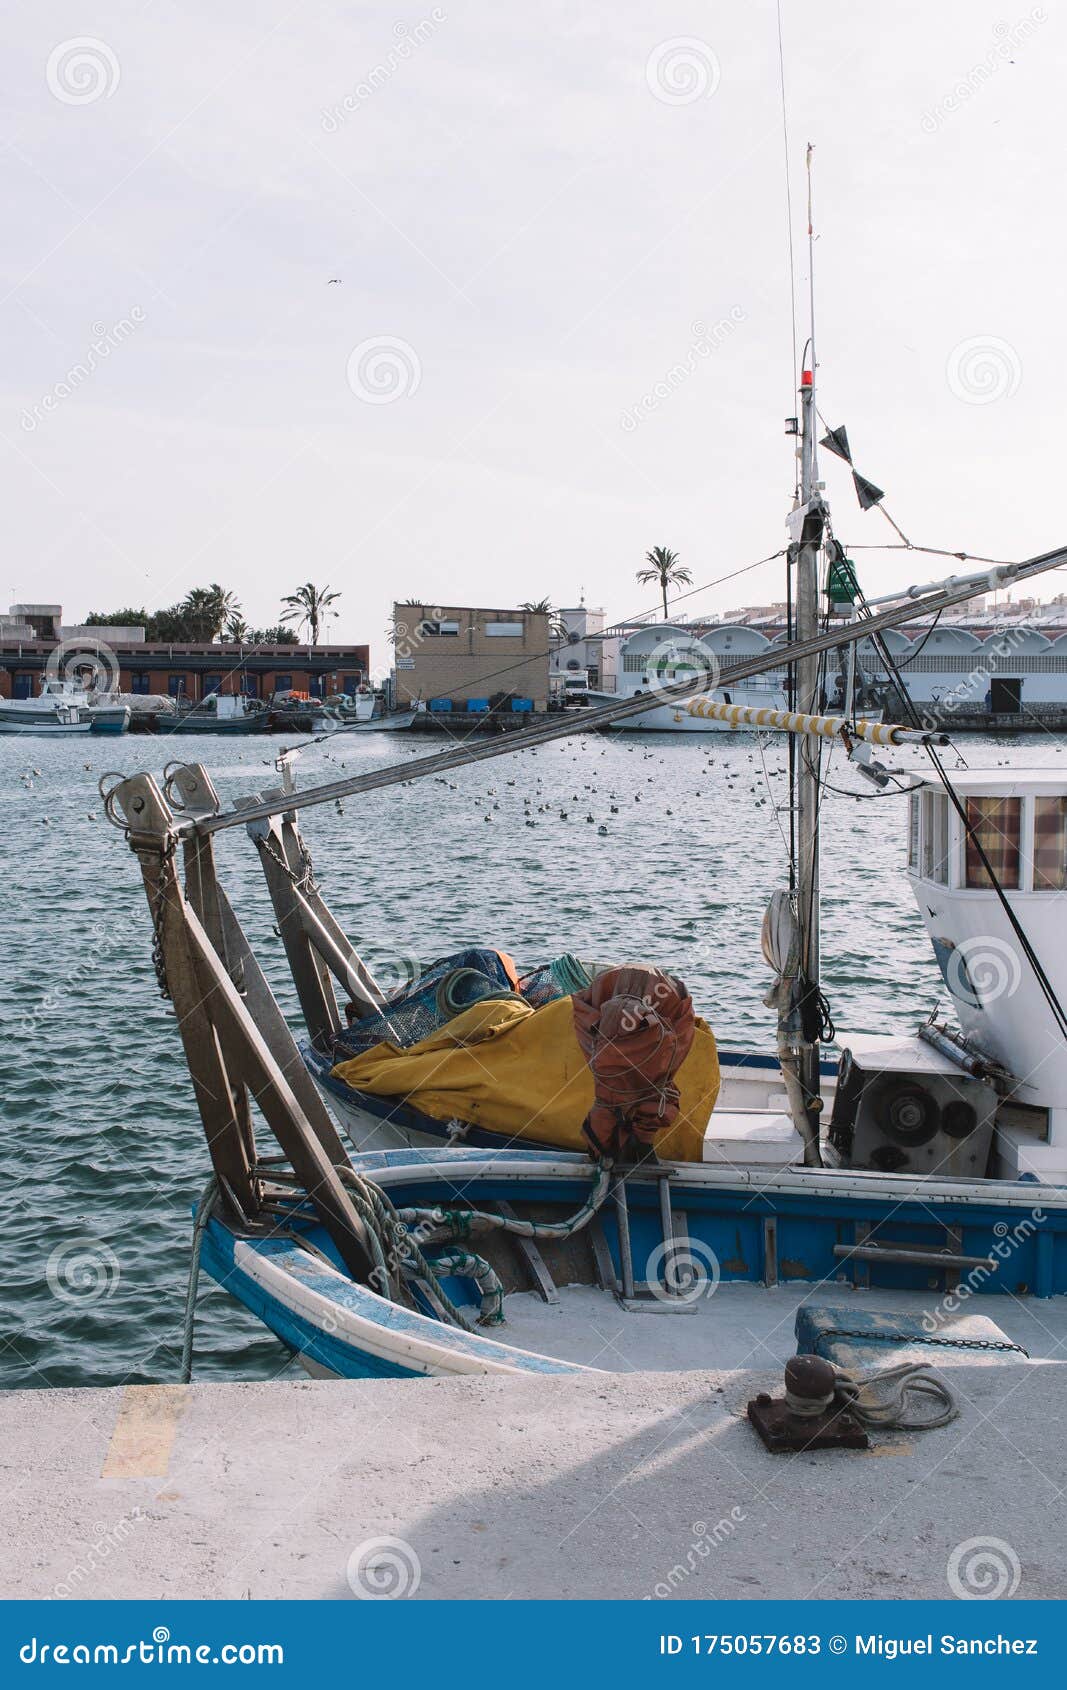 Fishing boat near the pier stock image. Image of fasten ...